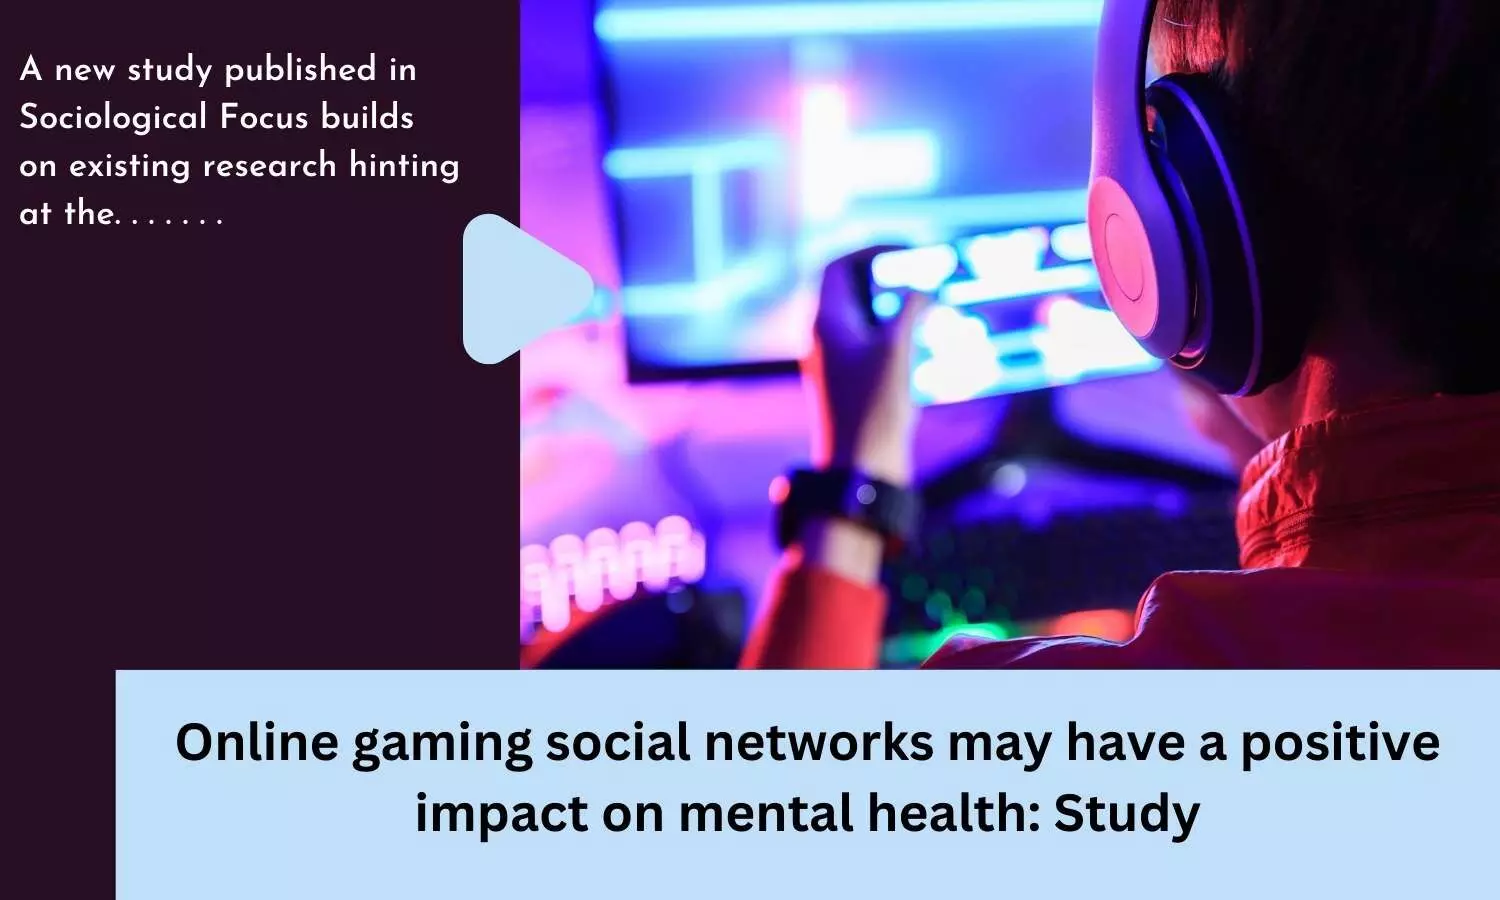 Online gaming social networks may have a positive impact on mental health: Study